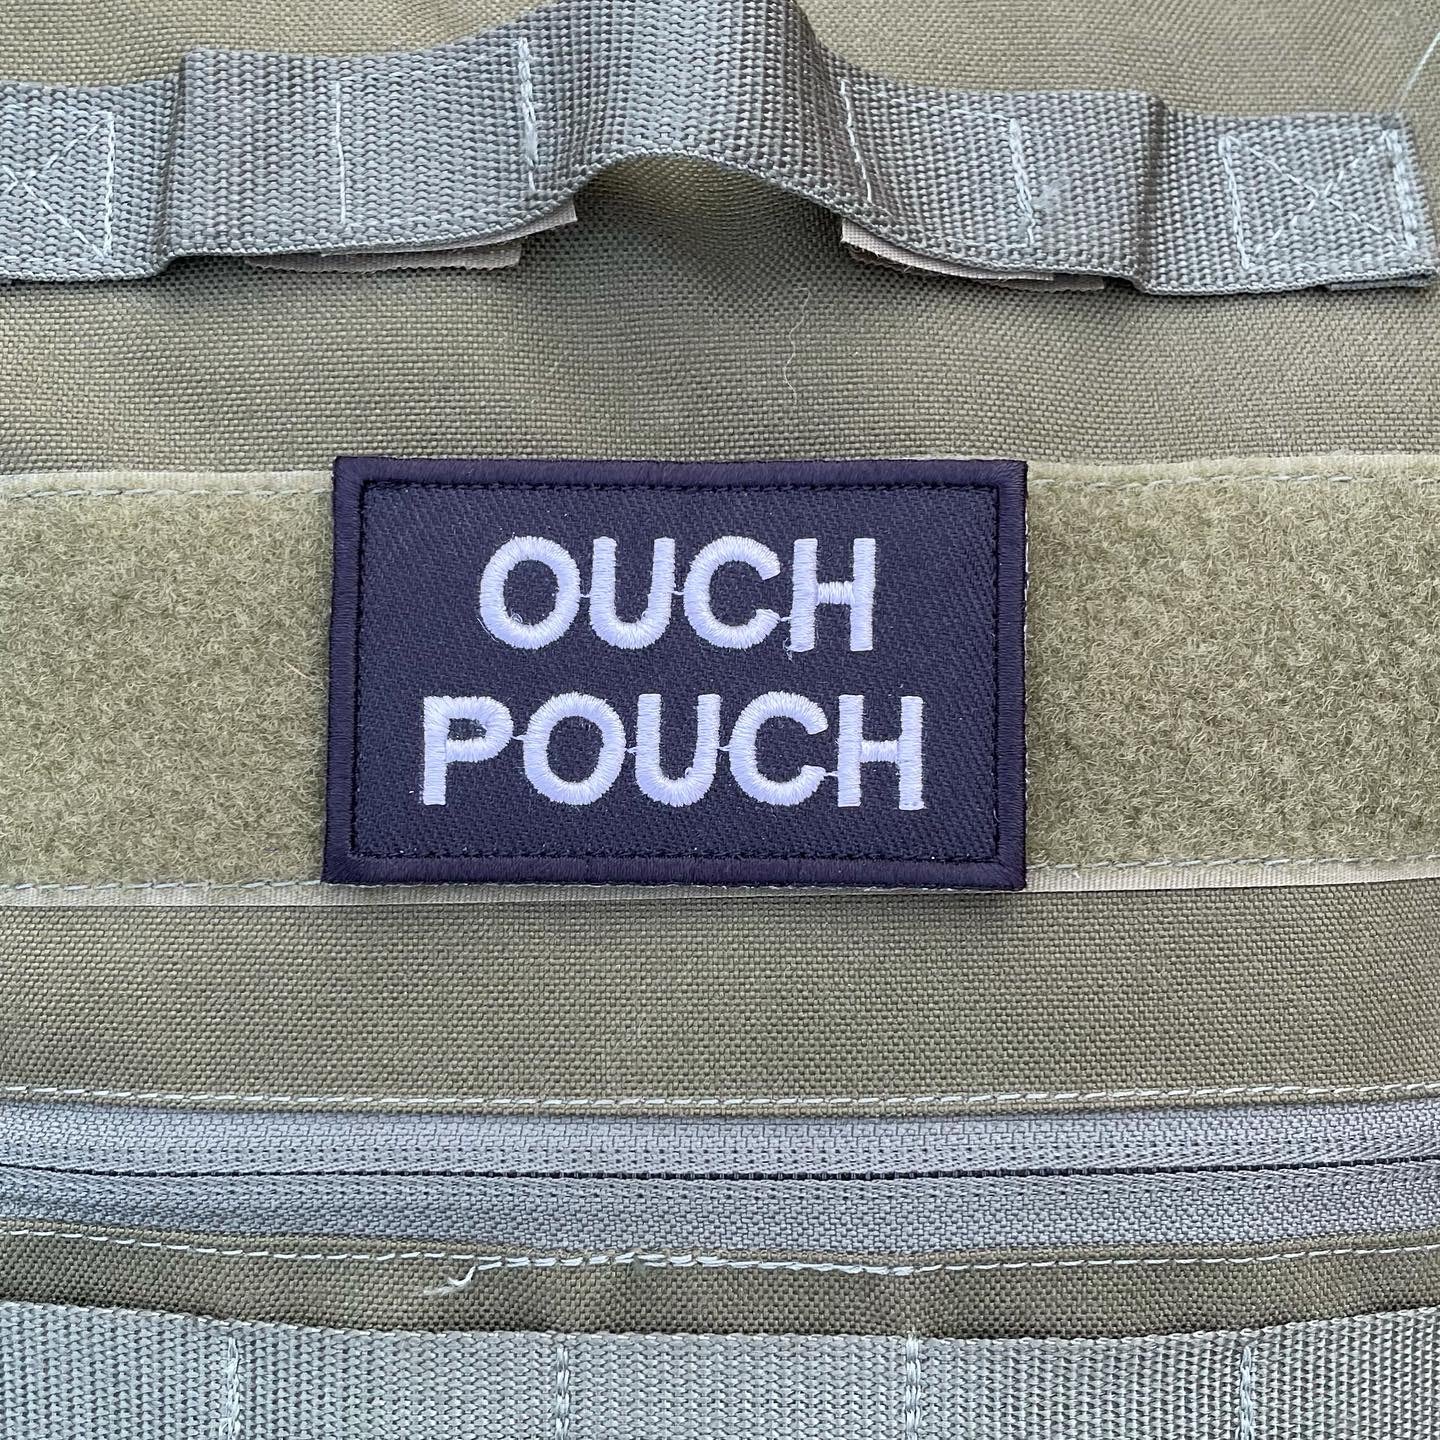 Ouch Pouch Patch